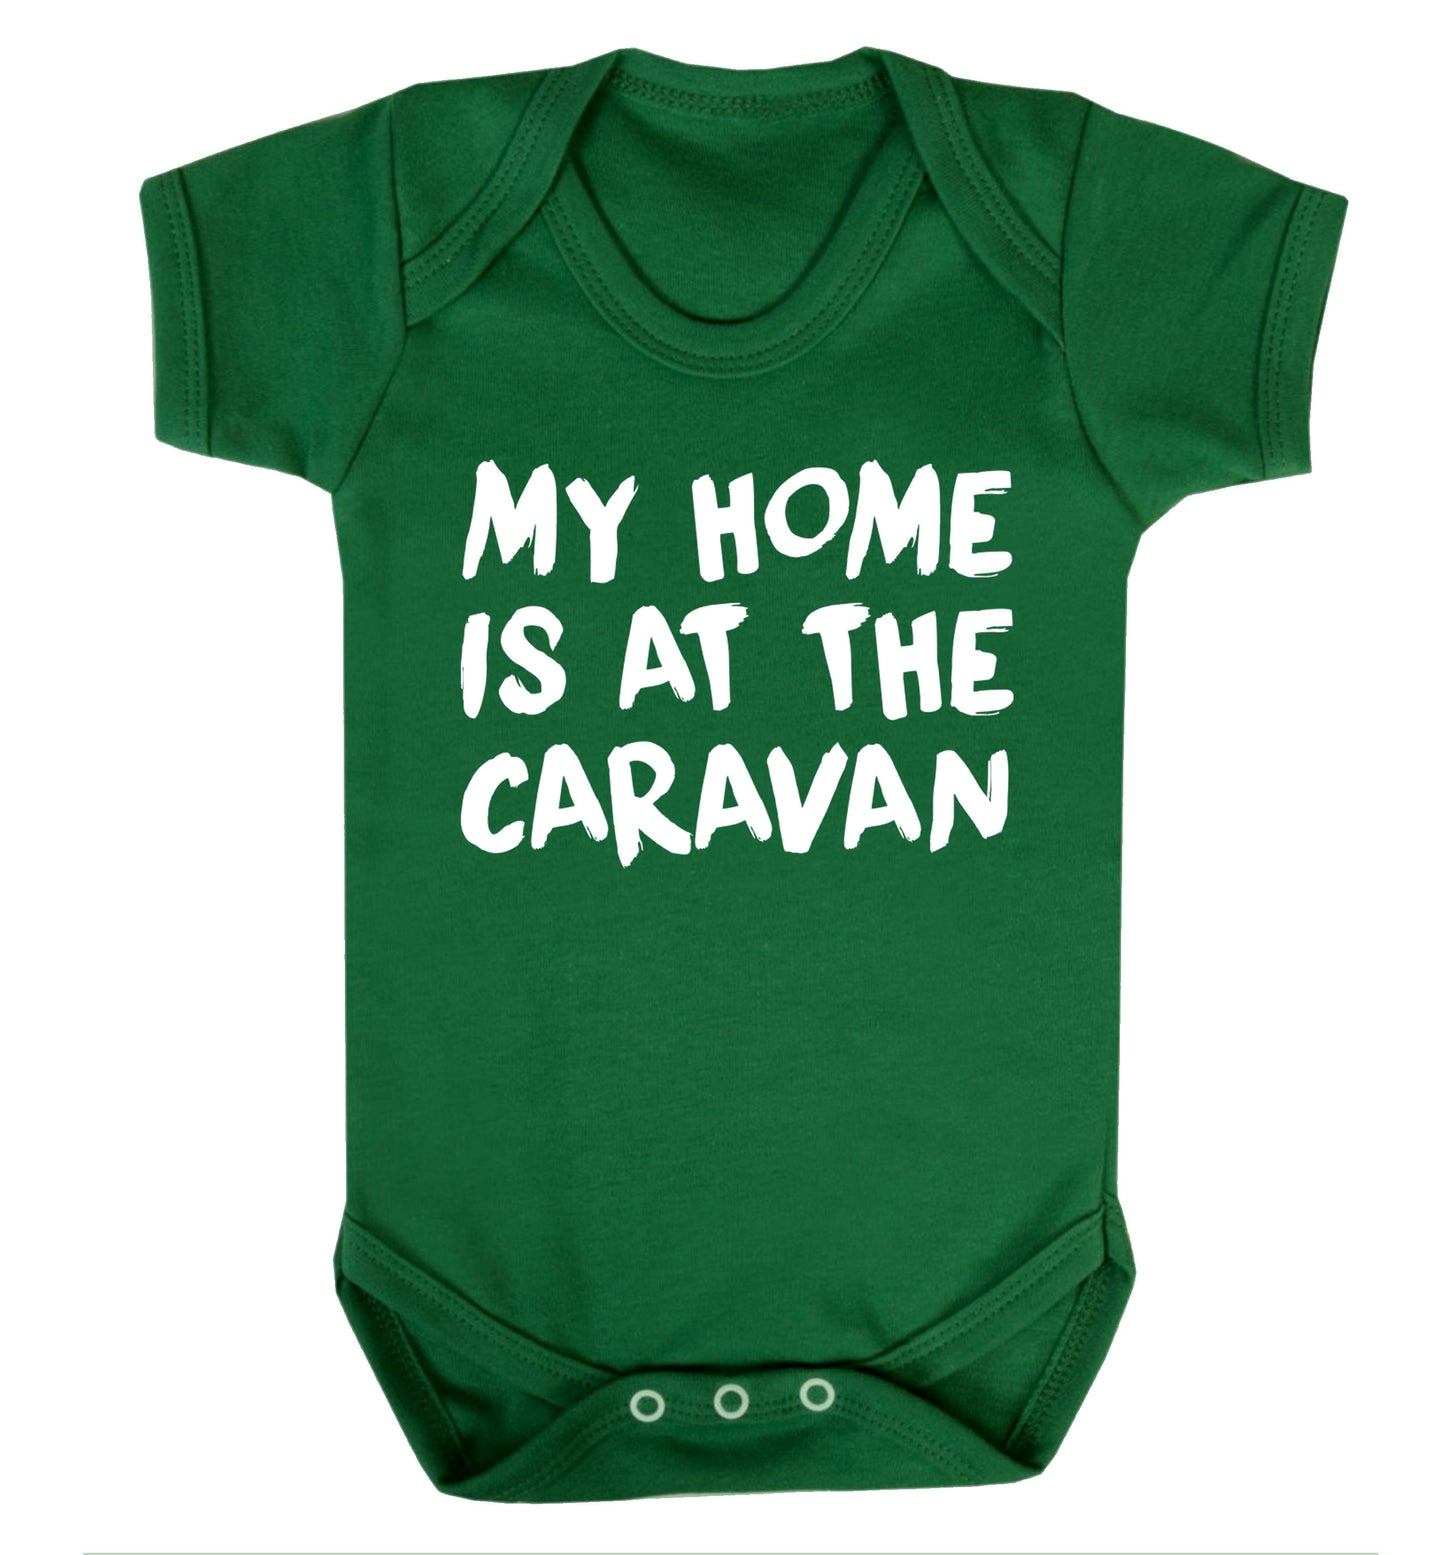 My home is at the caravan Baby Vest green 18-24 months